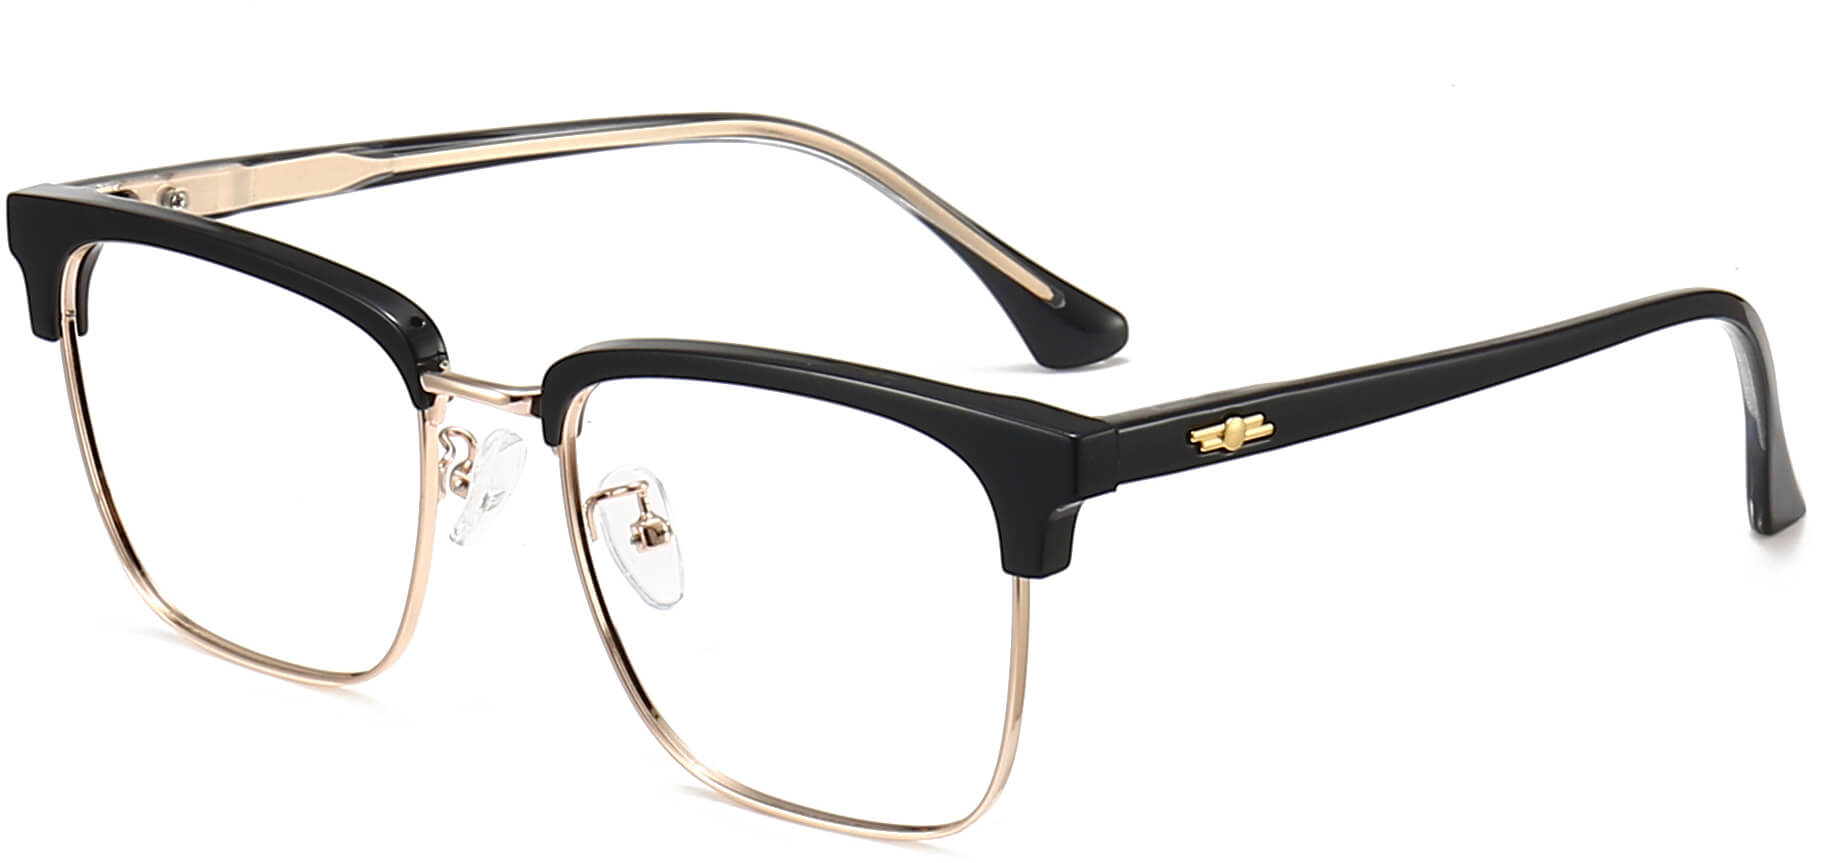 Alvin Browline Black Eyeglasses from ANRRI, angle view